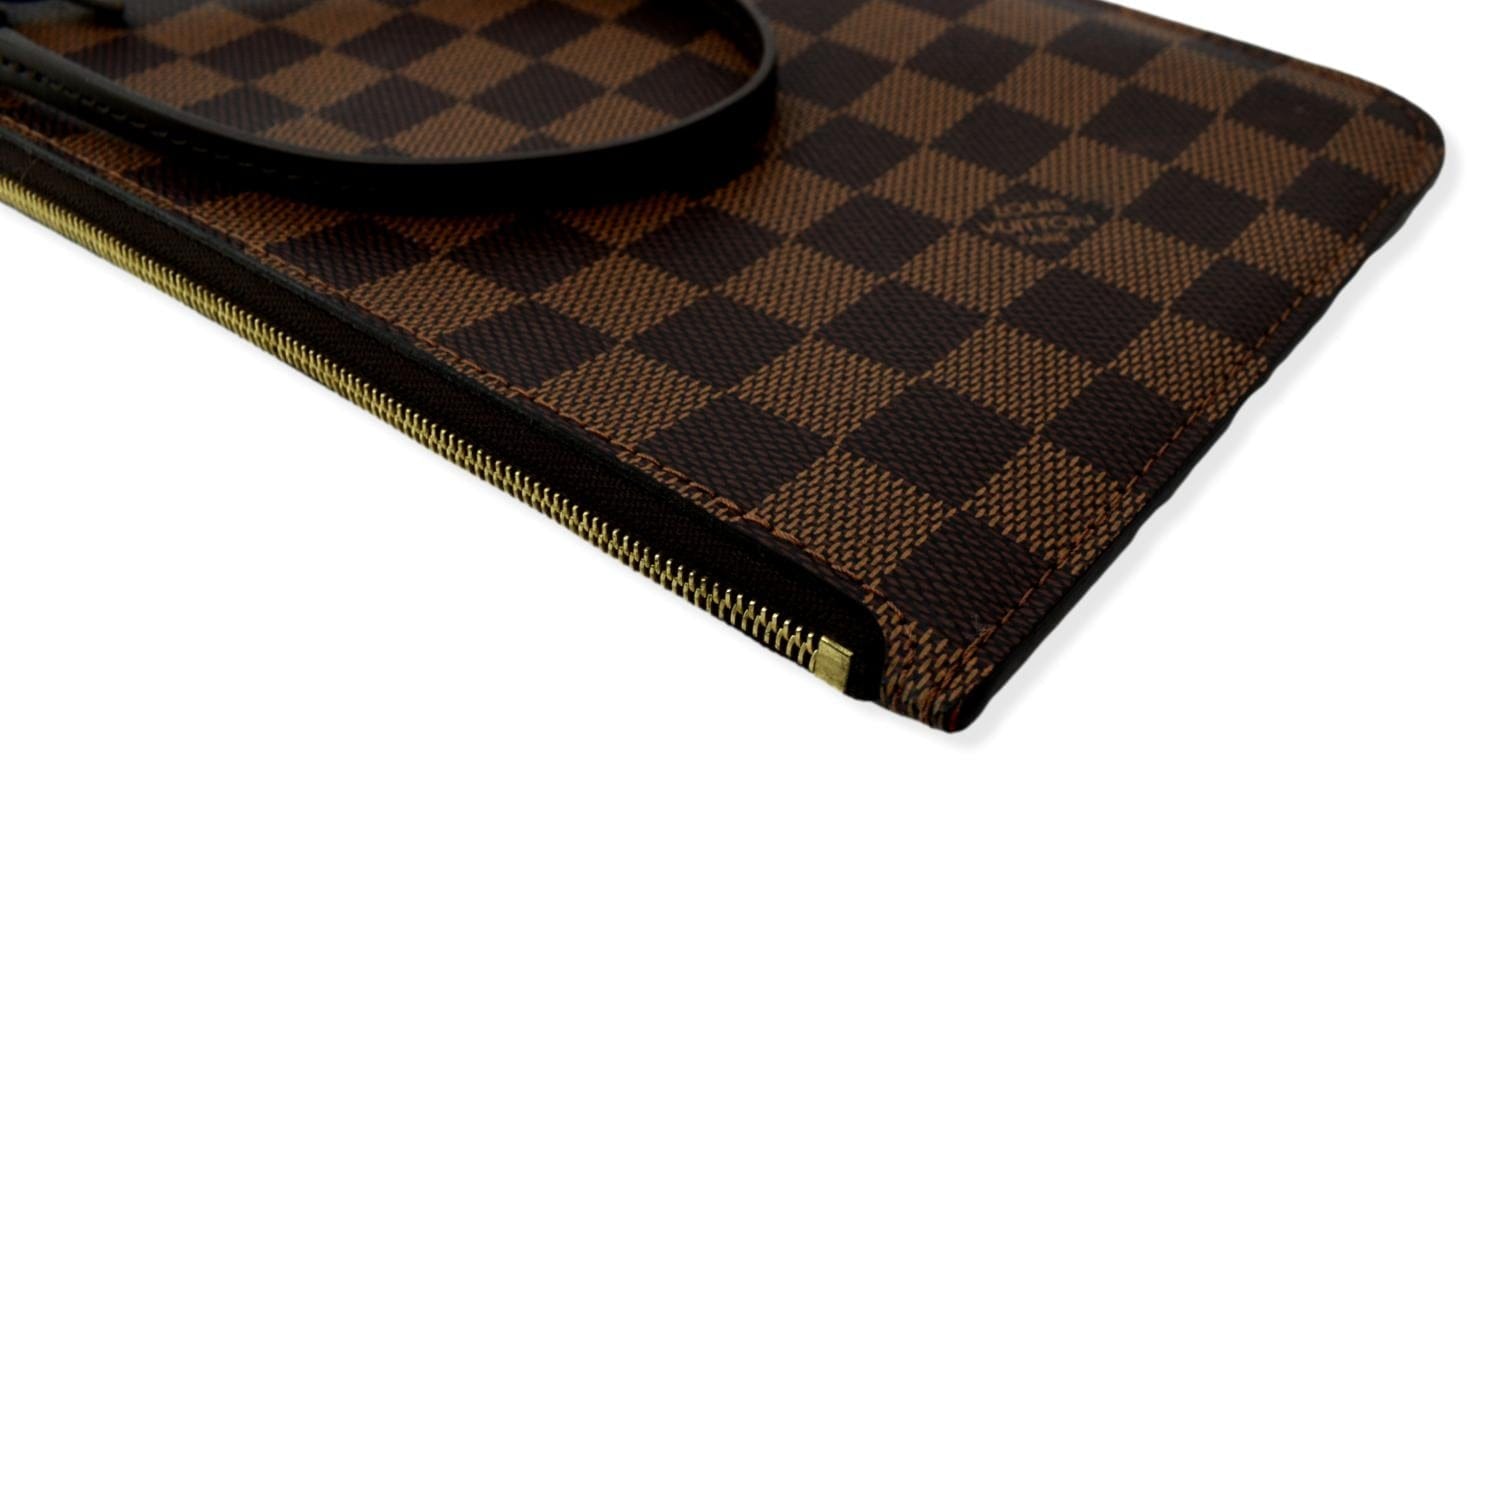 Mcraft® dark brown Leather Wristlet strap, compatible with damier ebene  pochette wallet agenda, Can use as key chain.